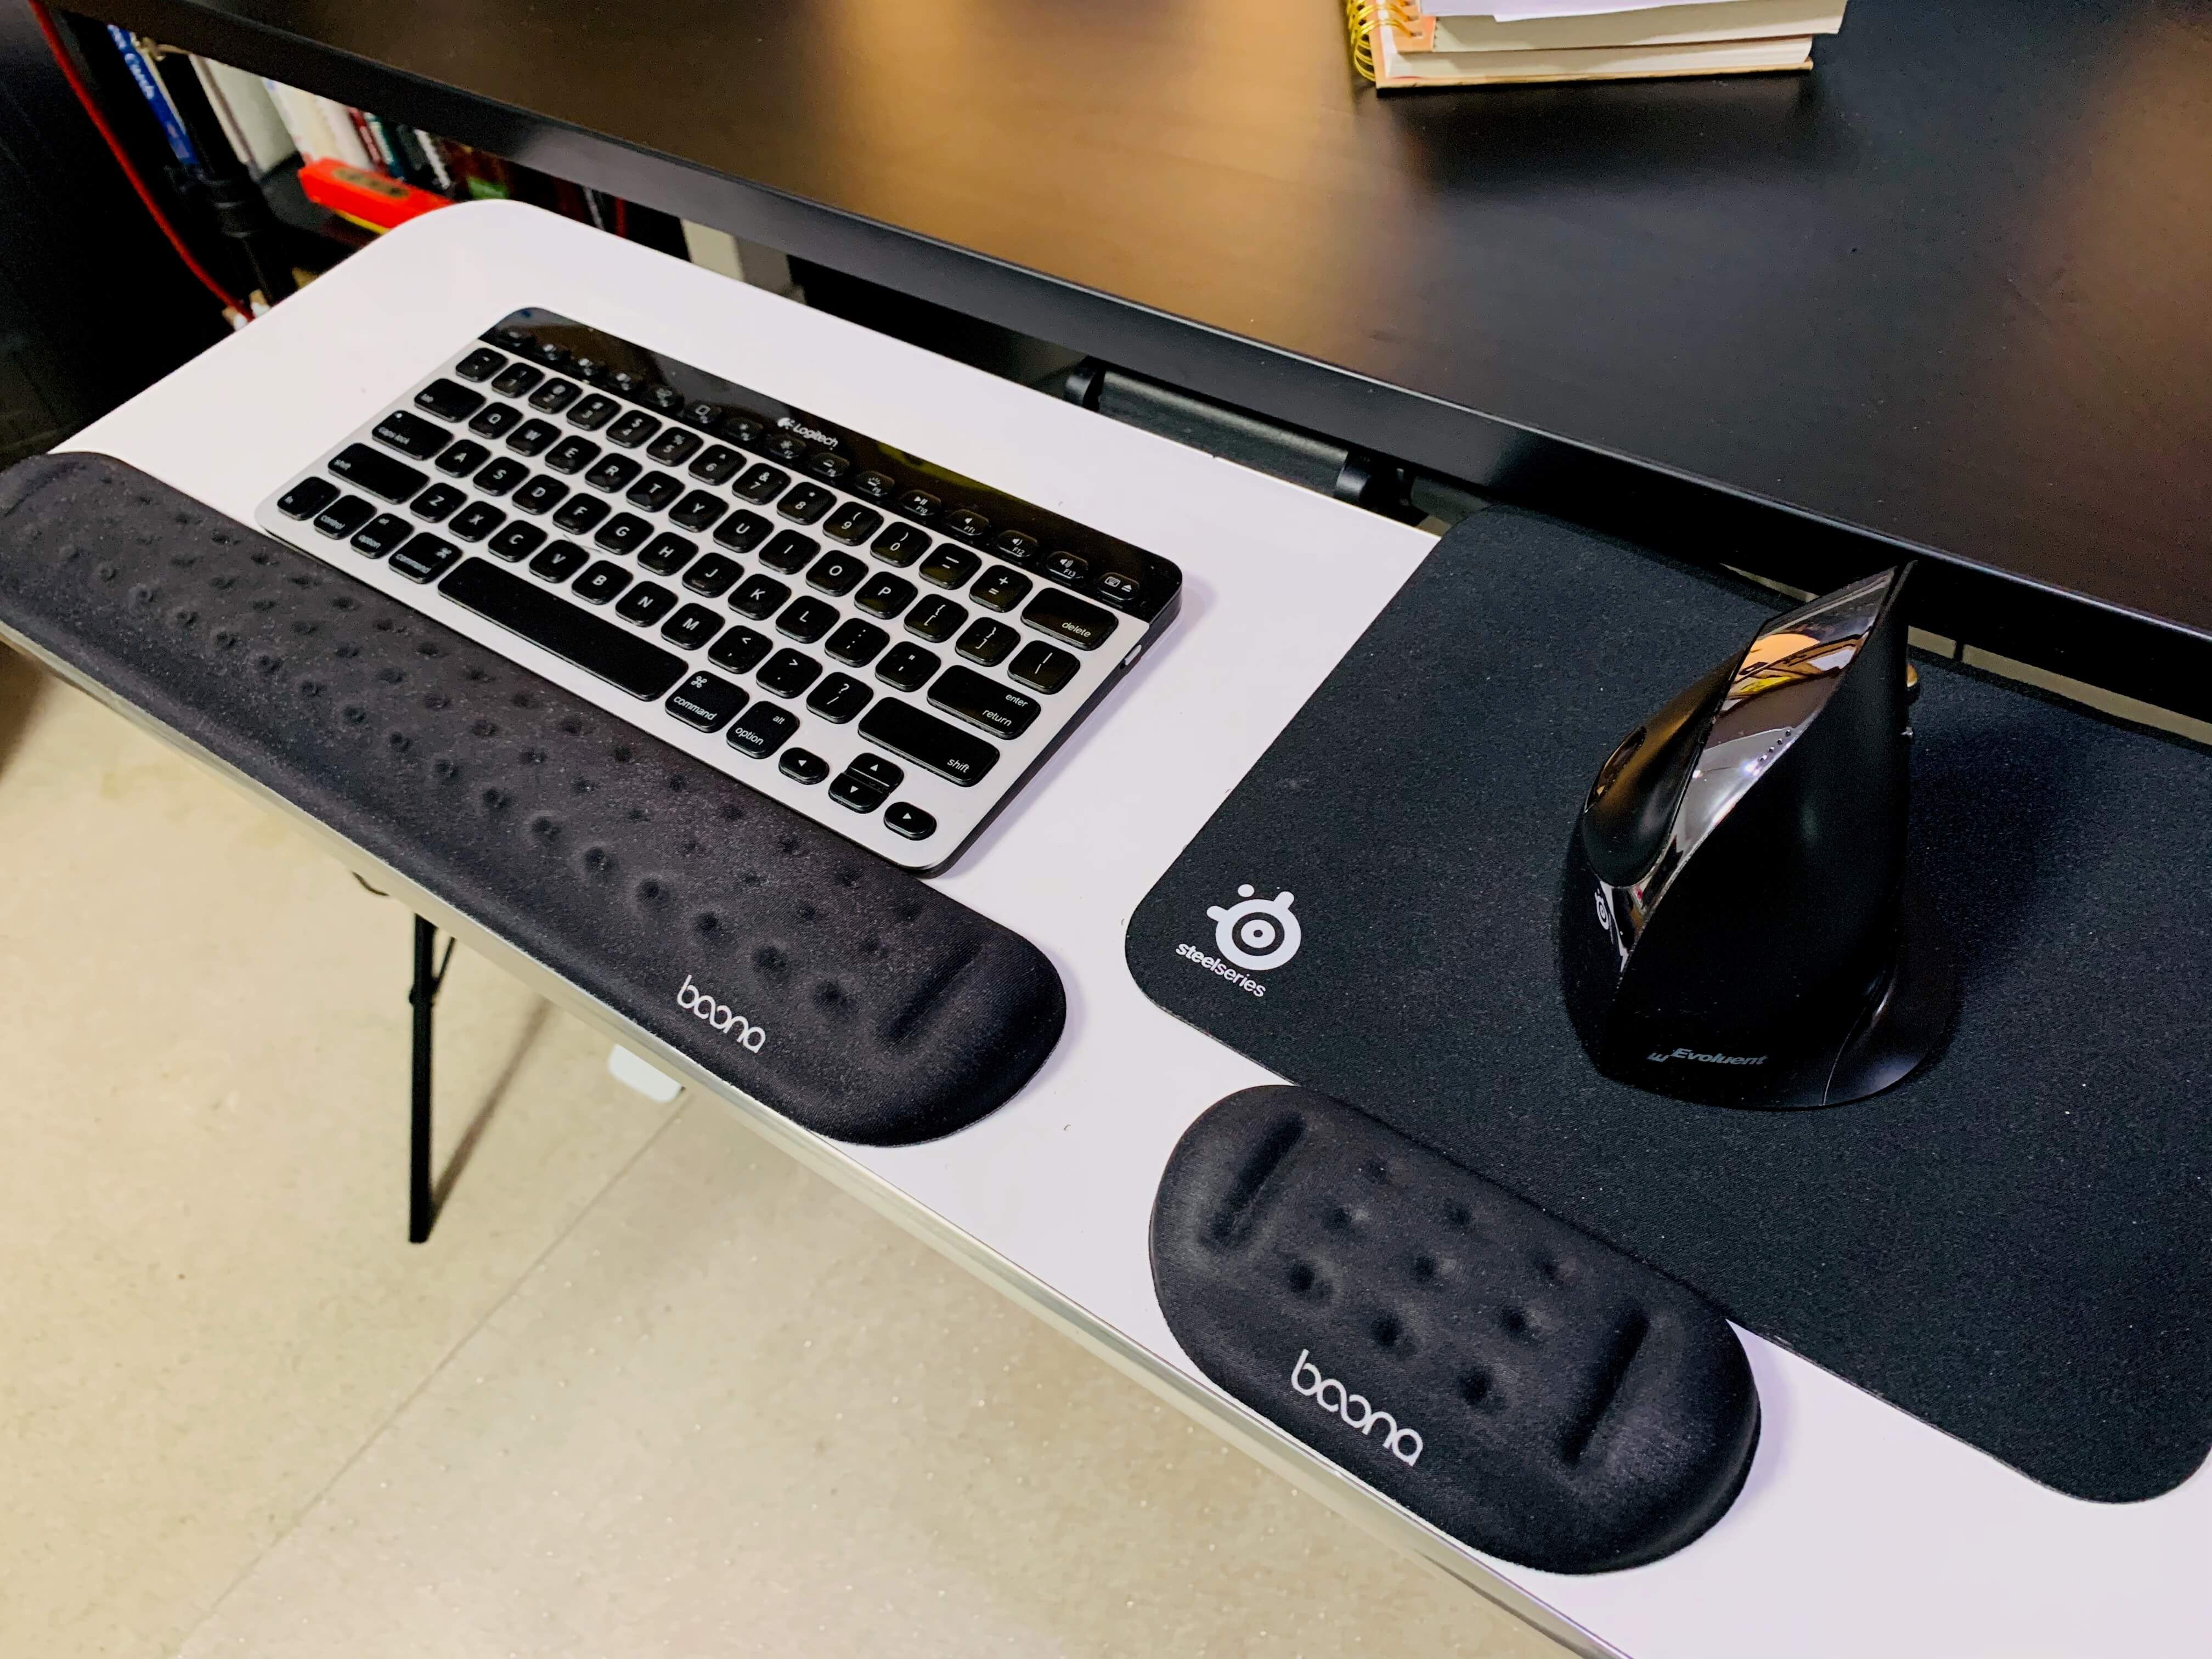 Logitech keyboard and Evoluent mouse